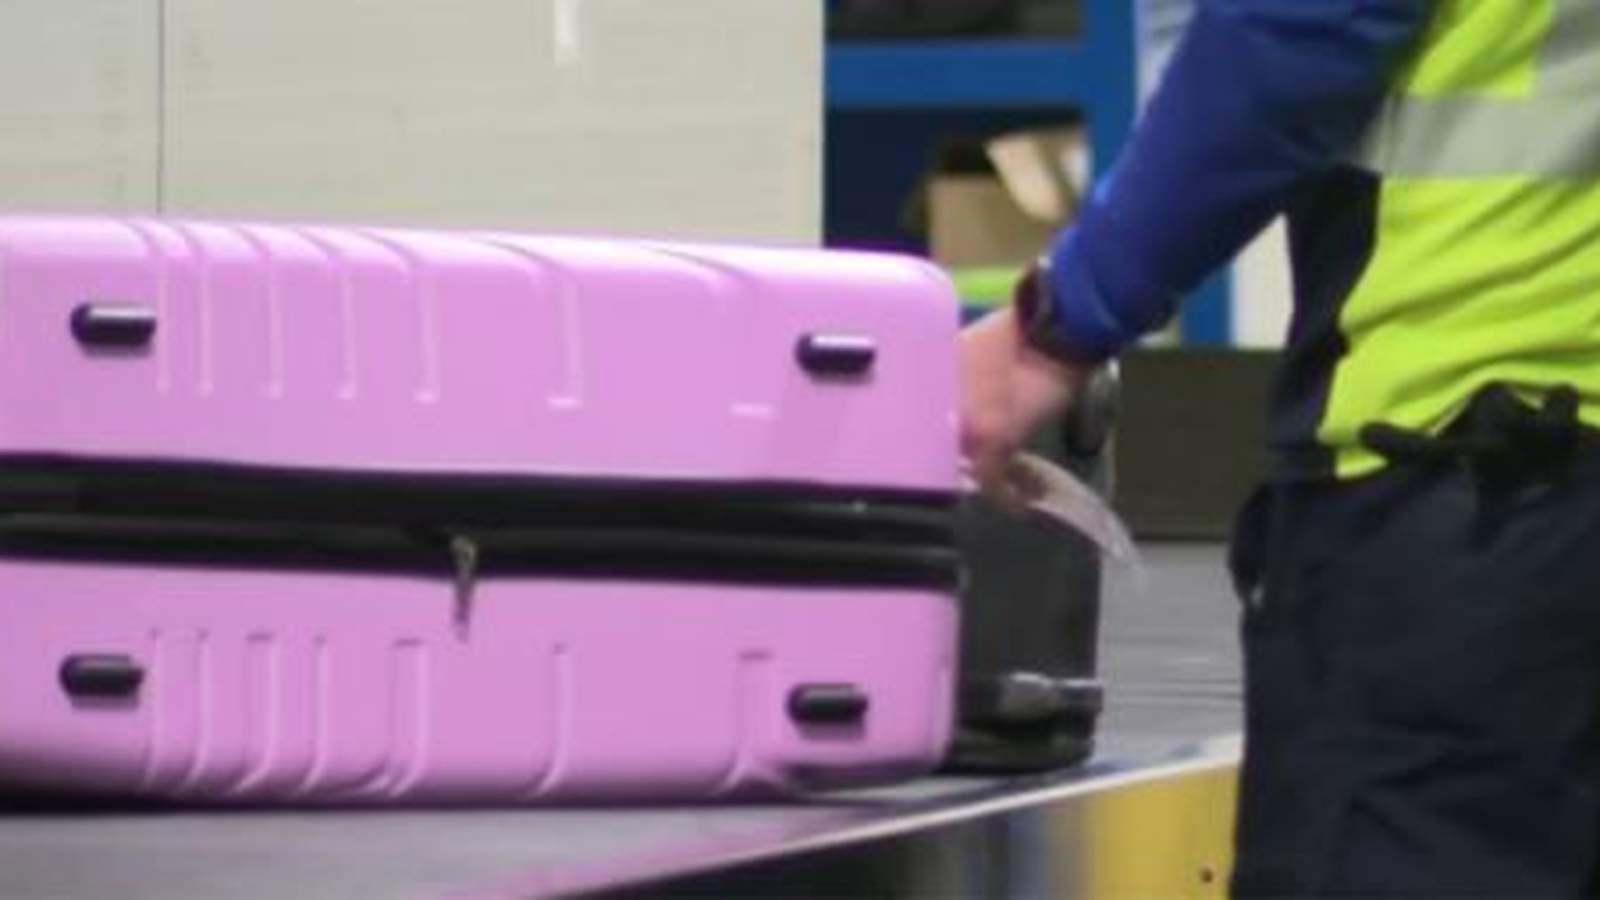 No more lost luggage, thanks to United Airlines’ new baggage handling technology